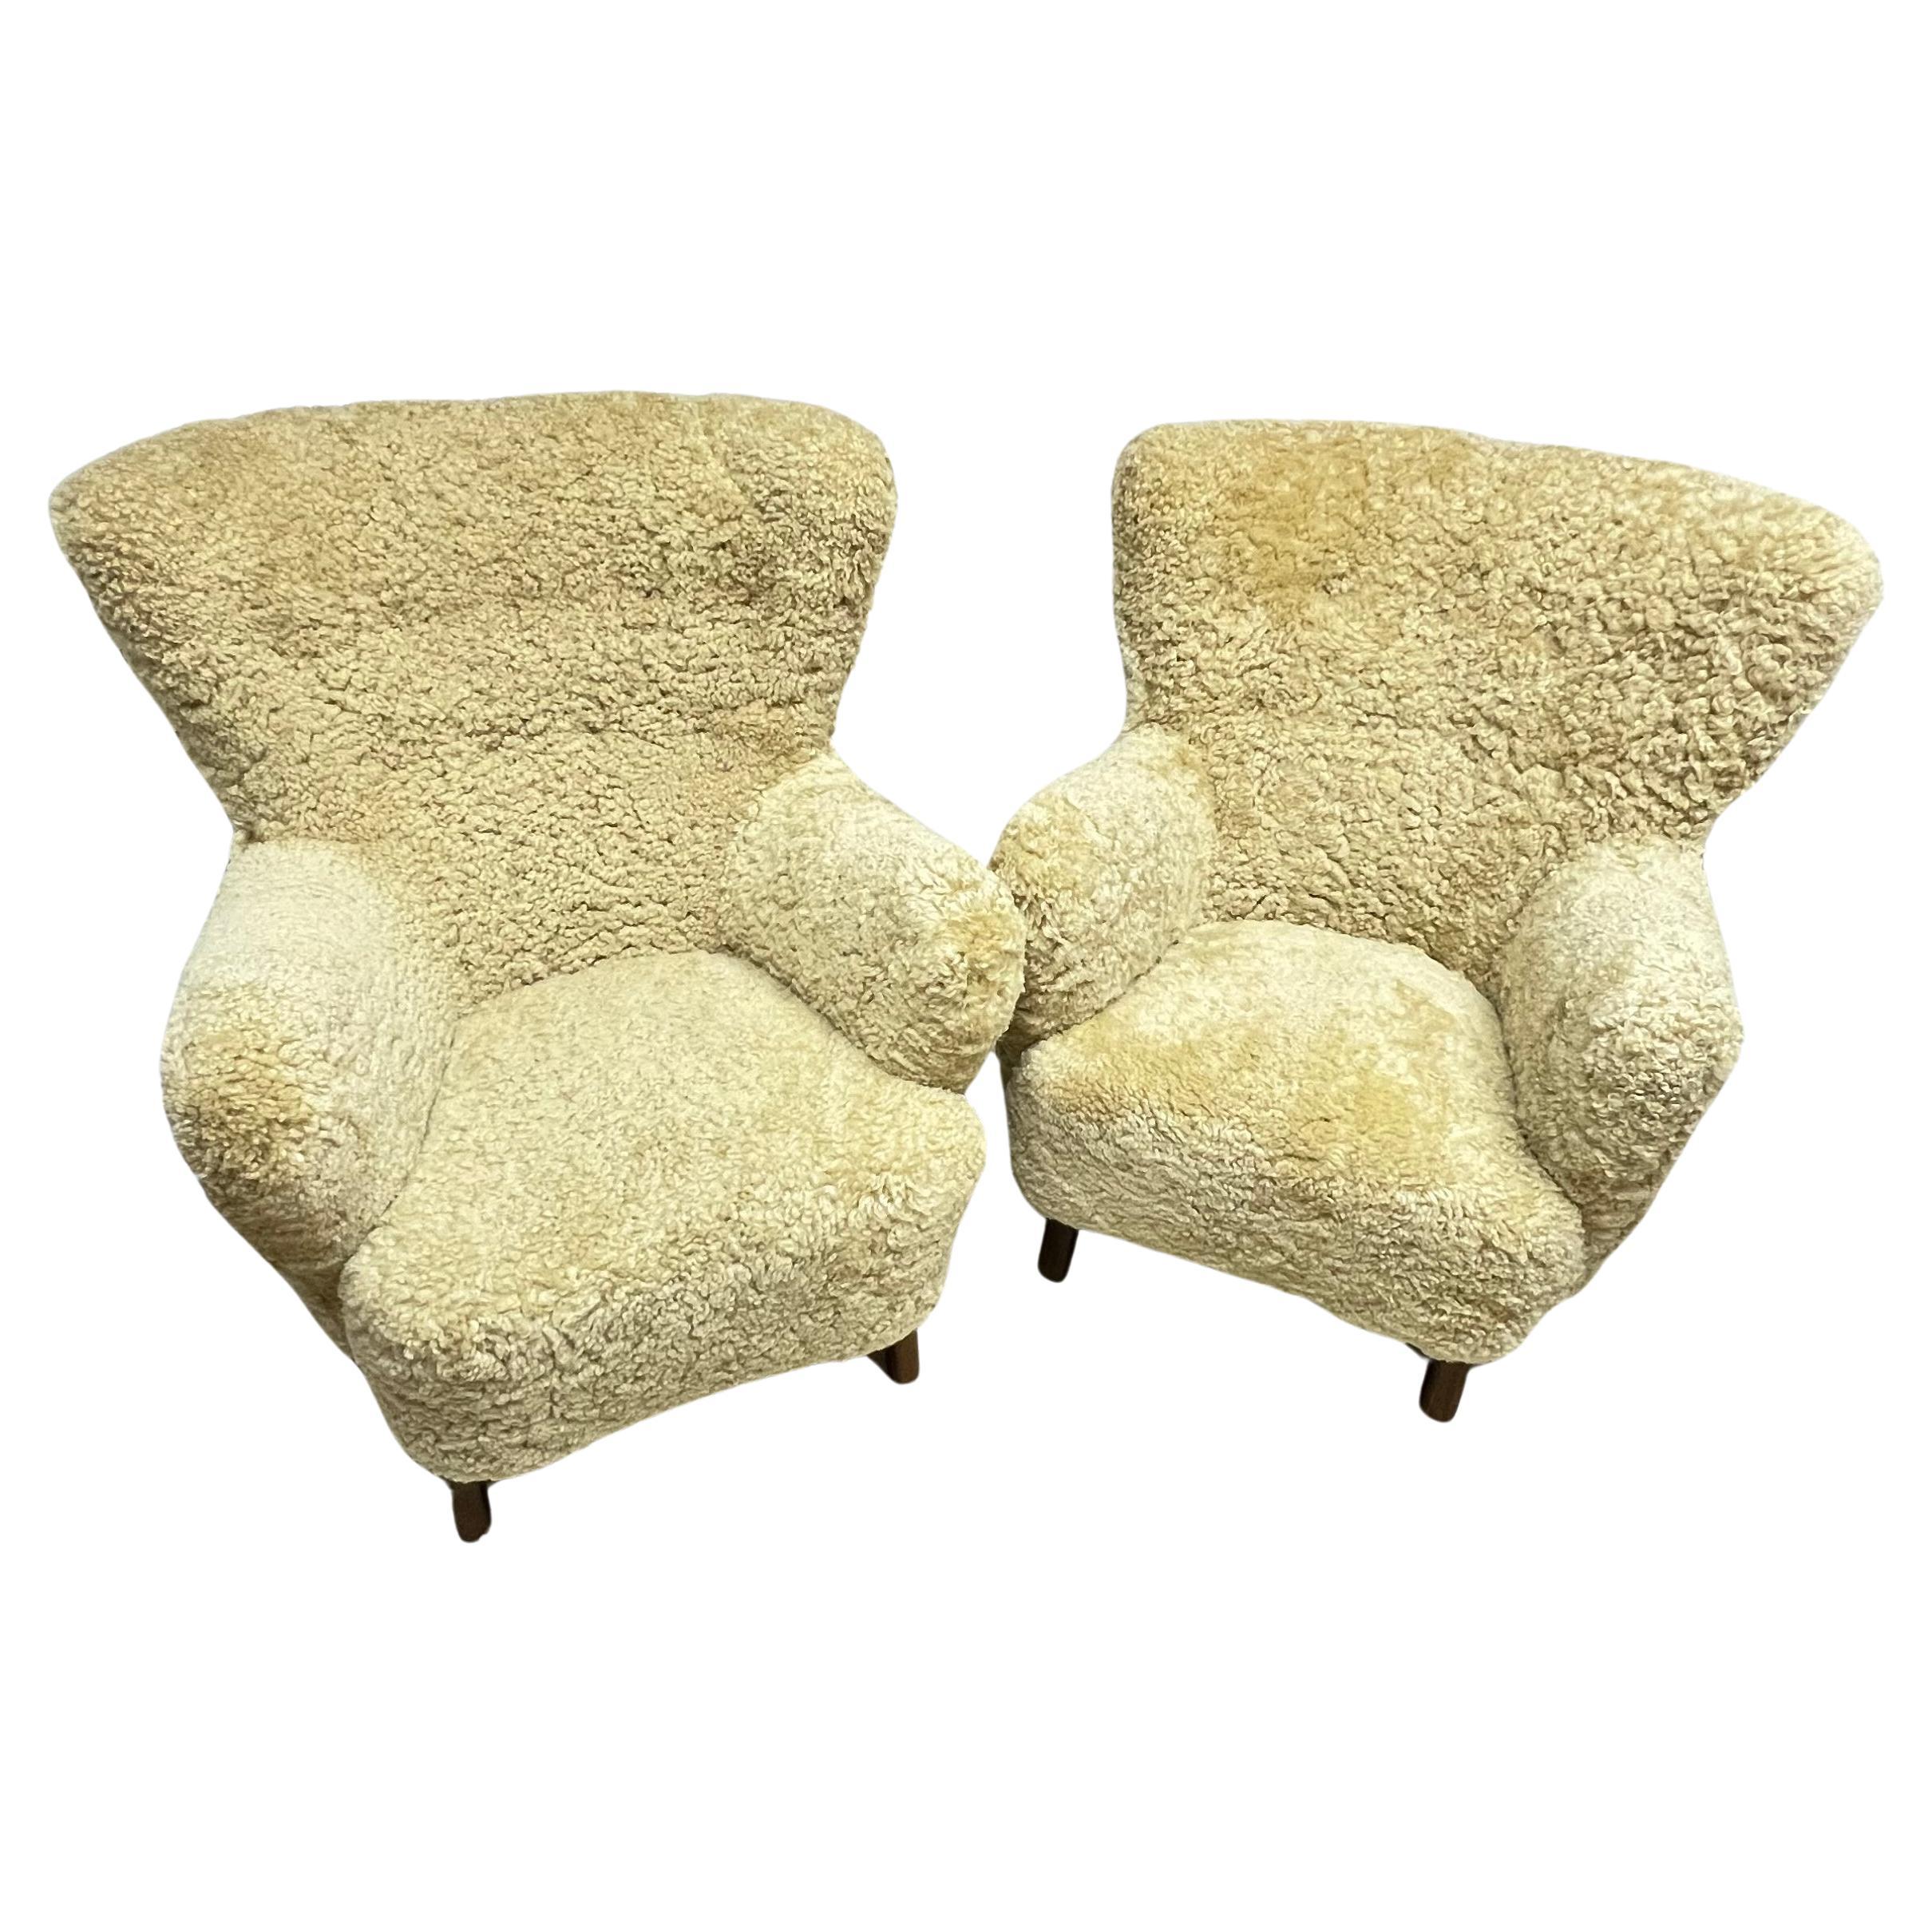 Pair of Shearling Chairs by Alfred Christensen, Denmark circa 1950 For Sale 4